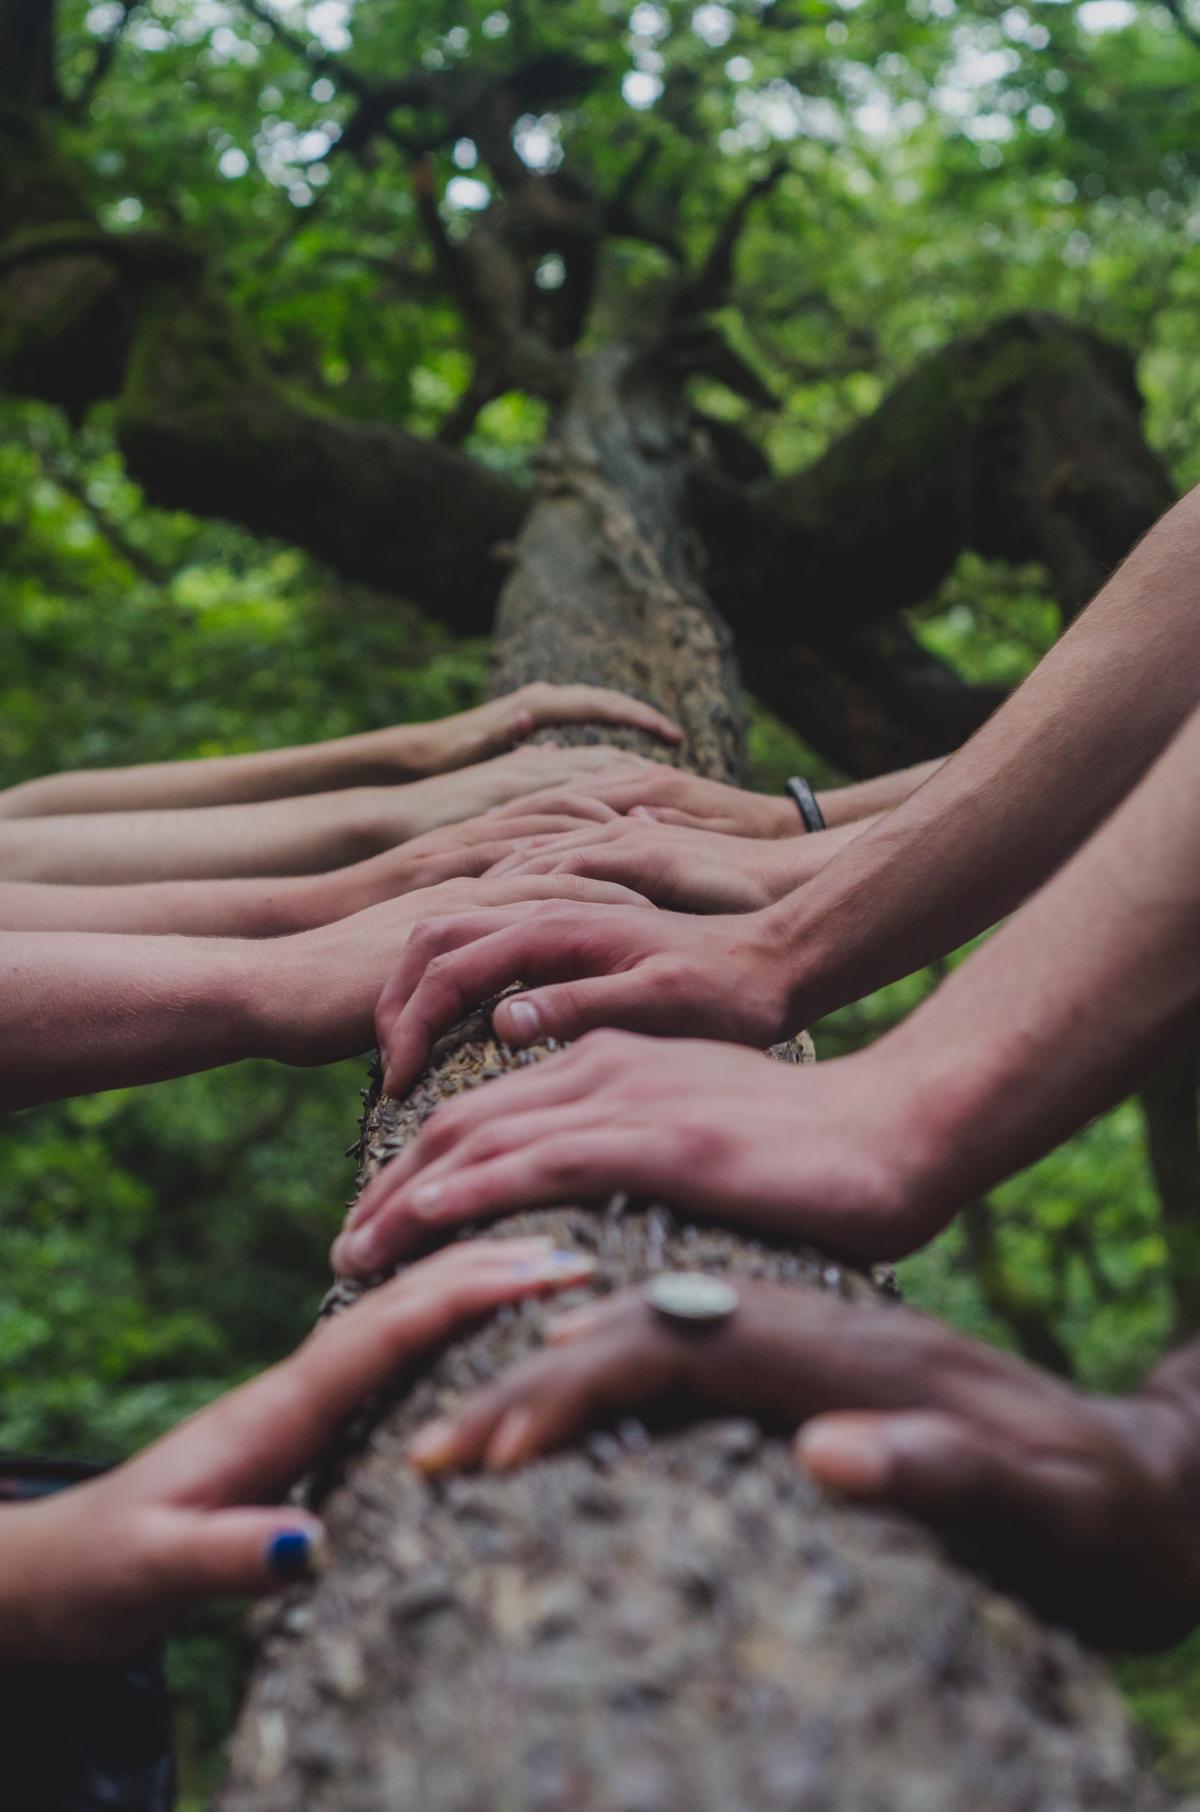 An image of a group of people standing together holding hands to symbolize a strong support system.